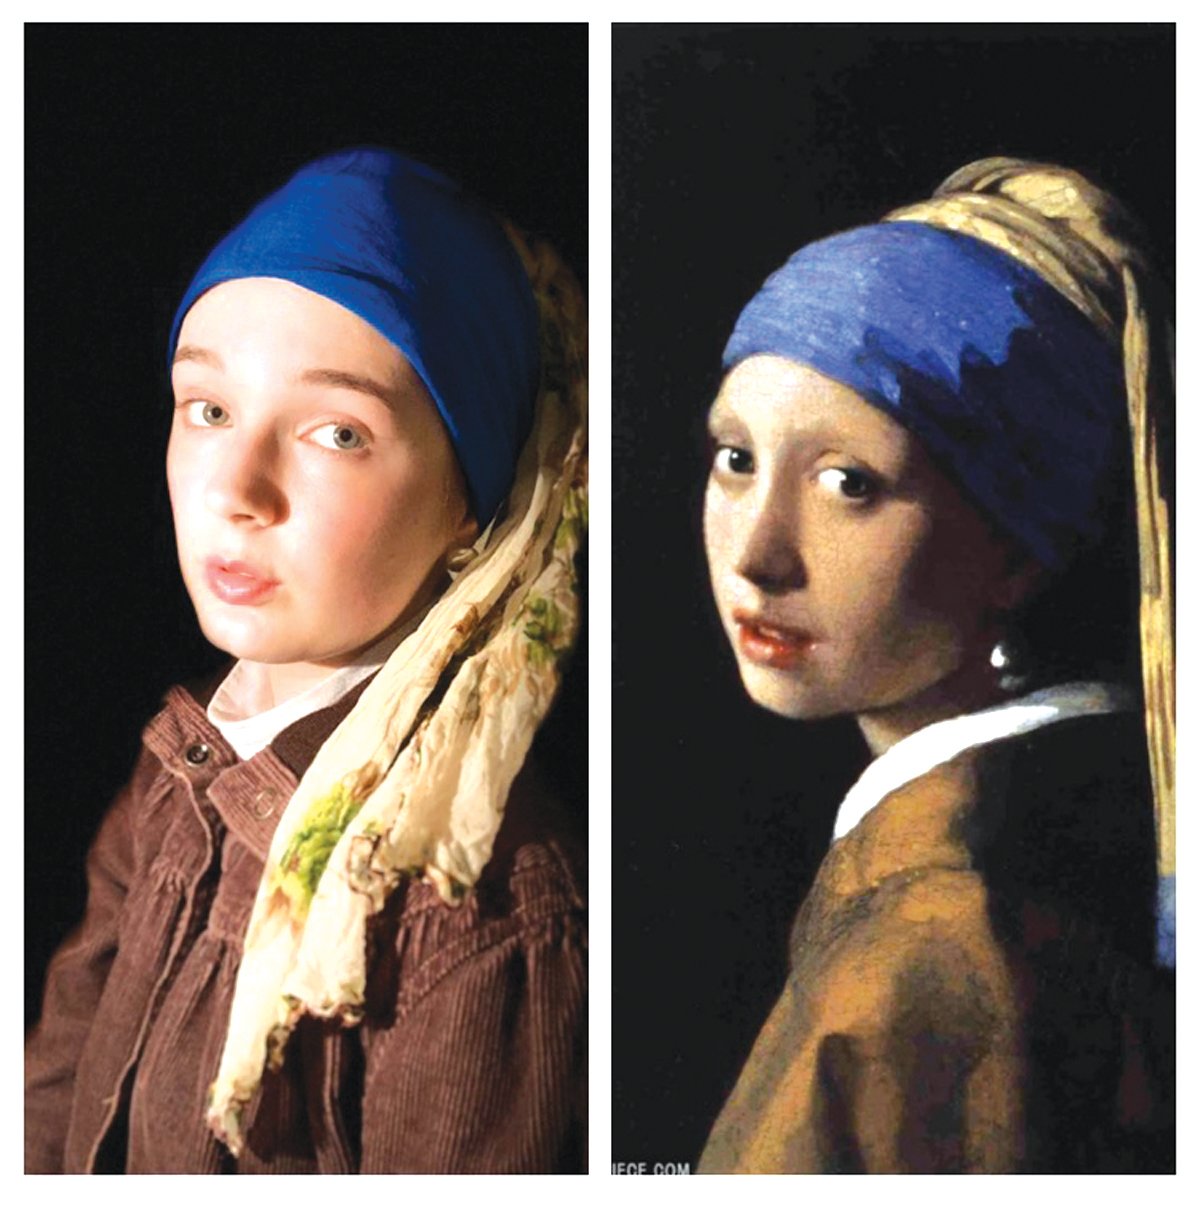 A CLASSIC: Alena Rooney portrays The Girl With the Pearl Earring by Johannes Vermeer.